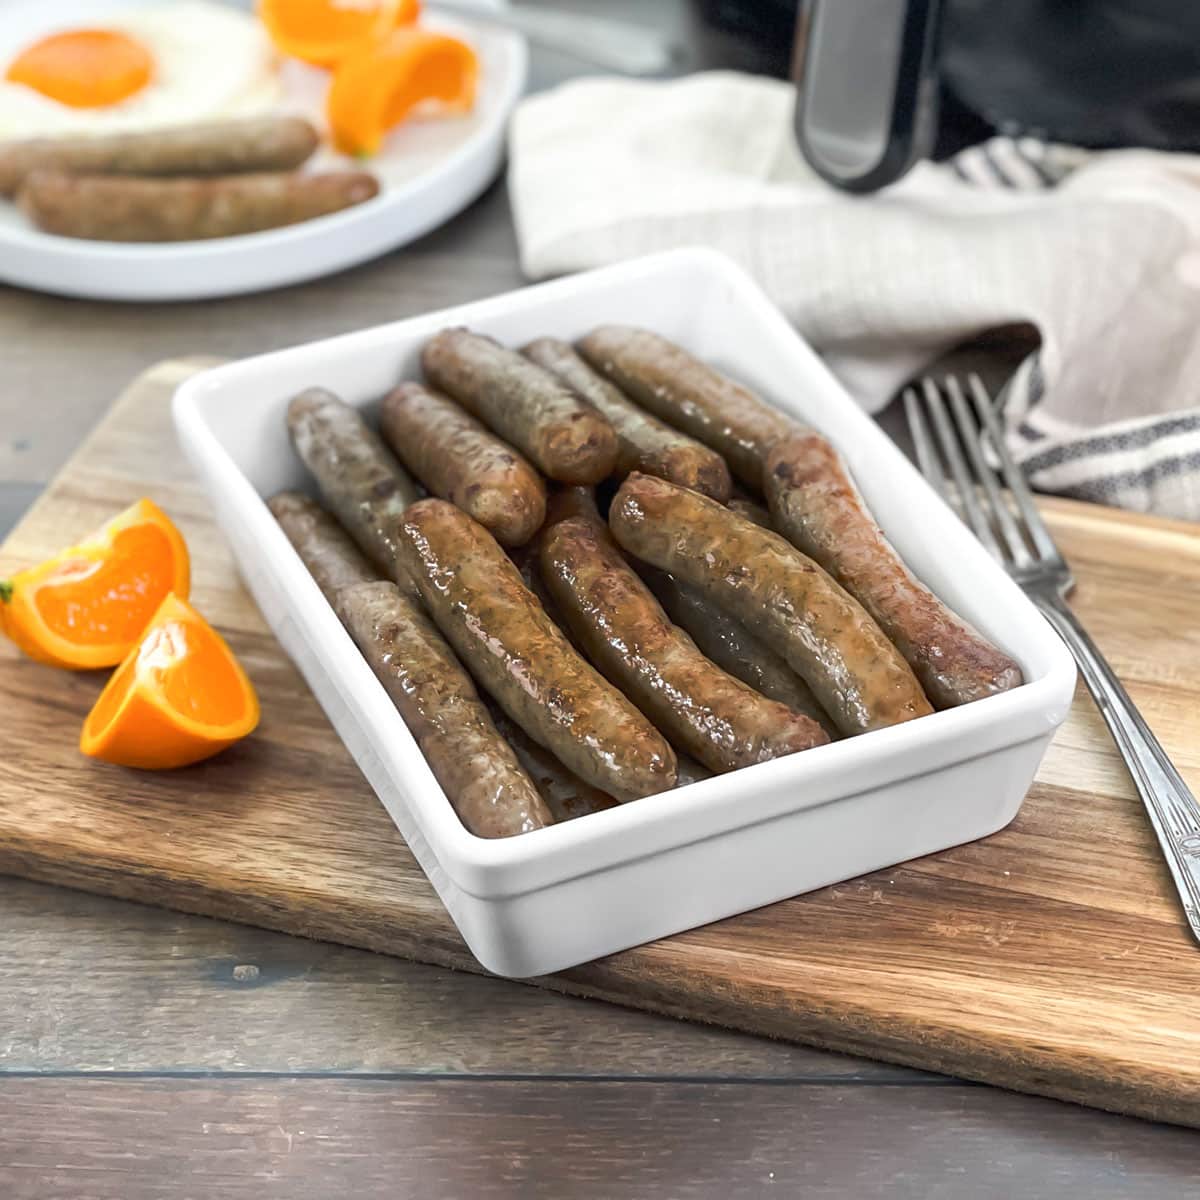 Breakfast sausage links on a white platter, with eggs and oranges in background.